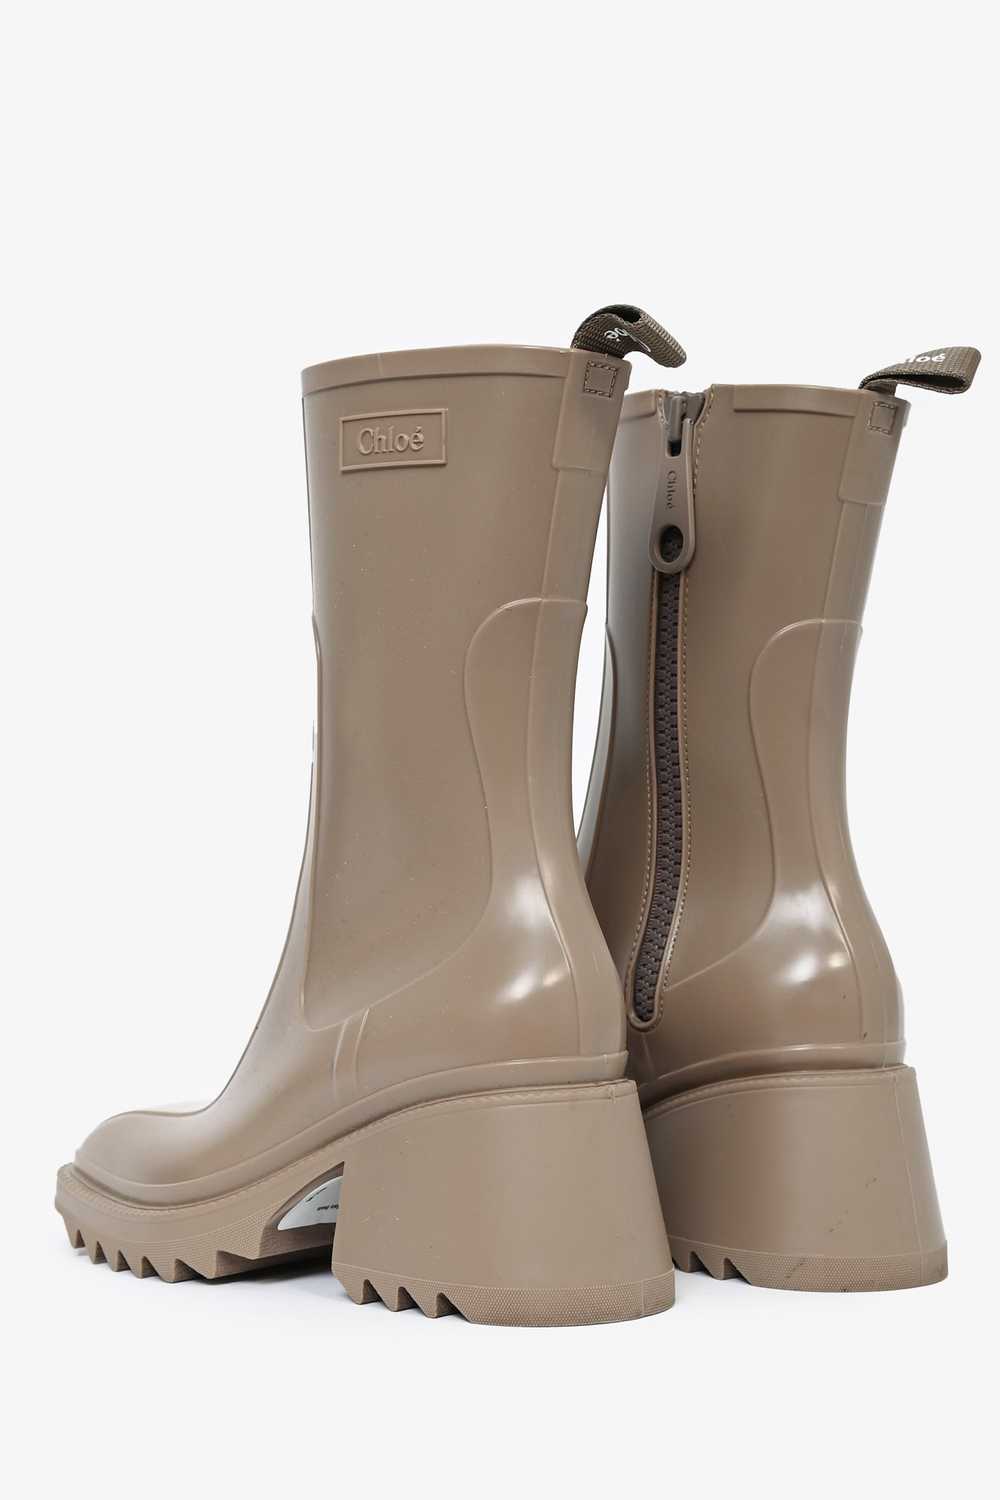 Chloe Taupe Zip Up 'Betty' Rain Boots Size 35 - image 5